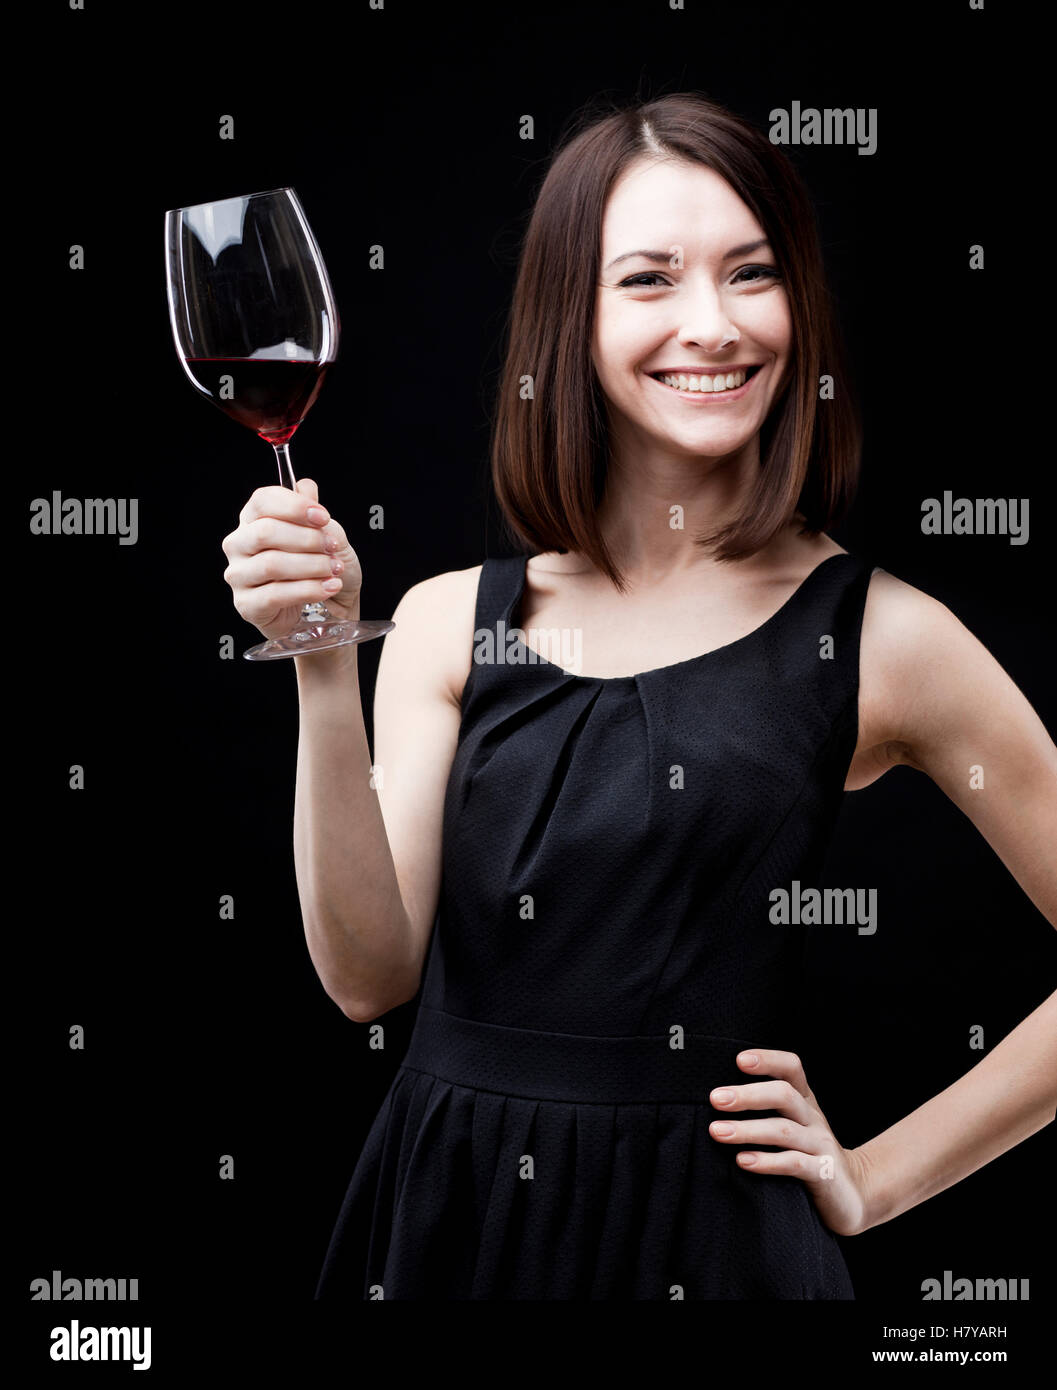 how to properly hold a wine glass